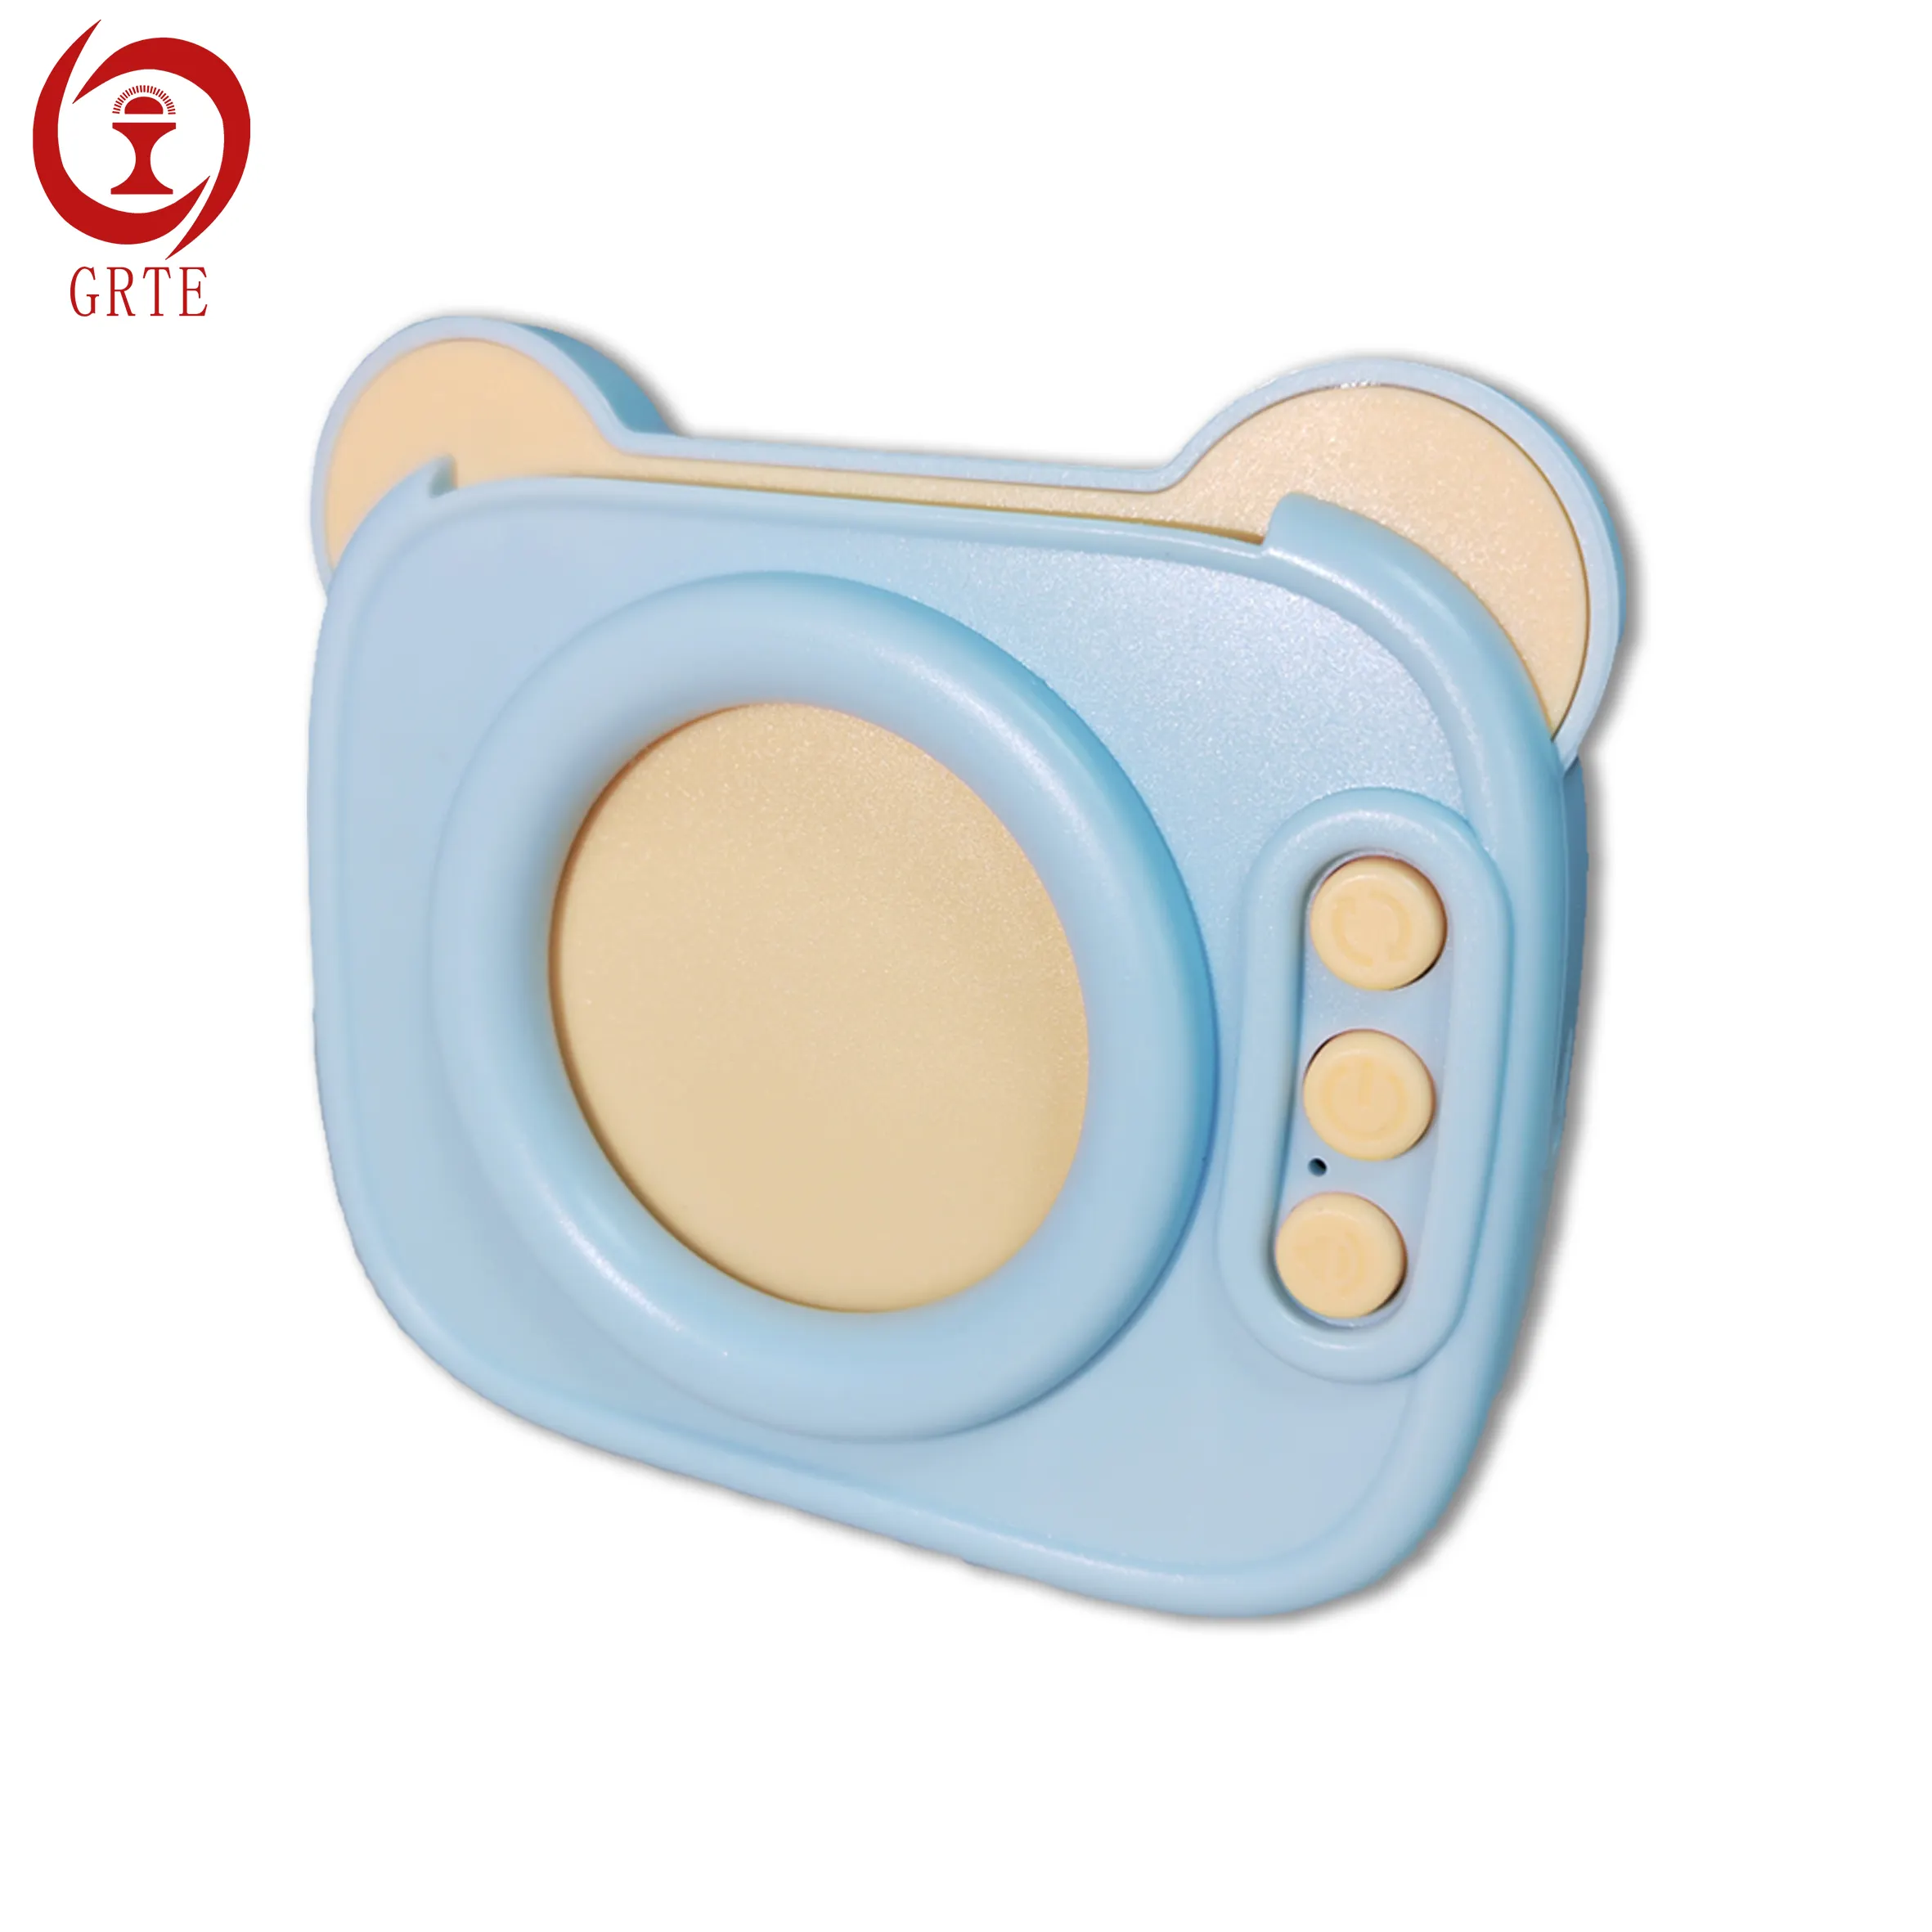 Hot Item Happy Study Bilingual Card Machine Educational Learning Chinese&English Kids musical Toy